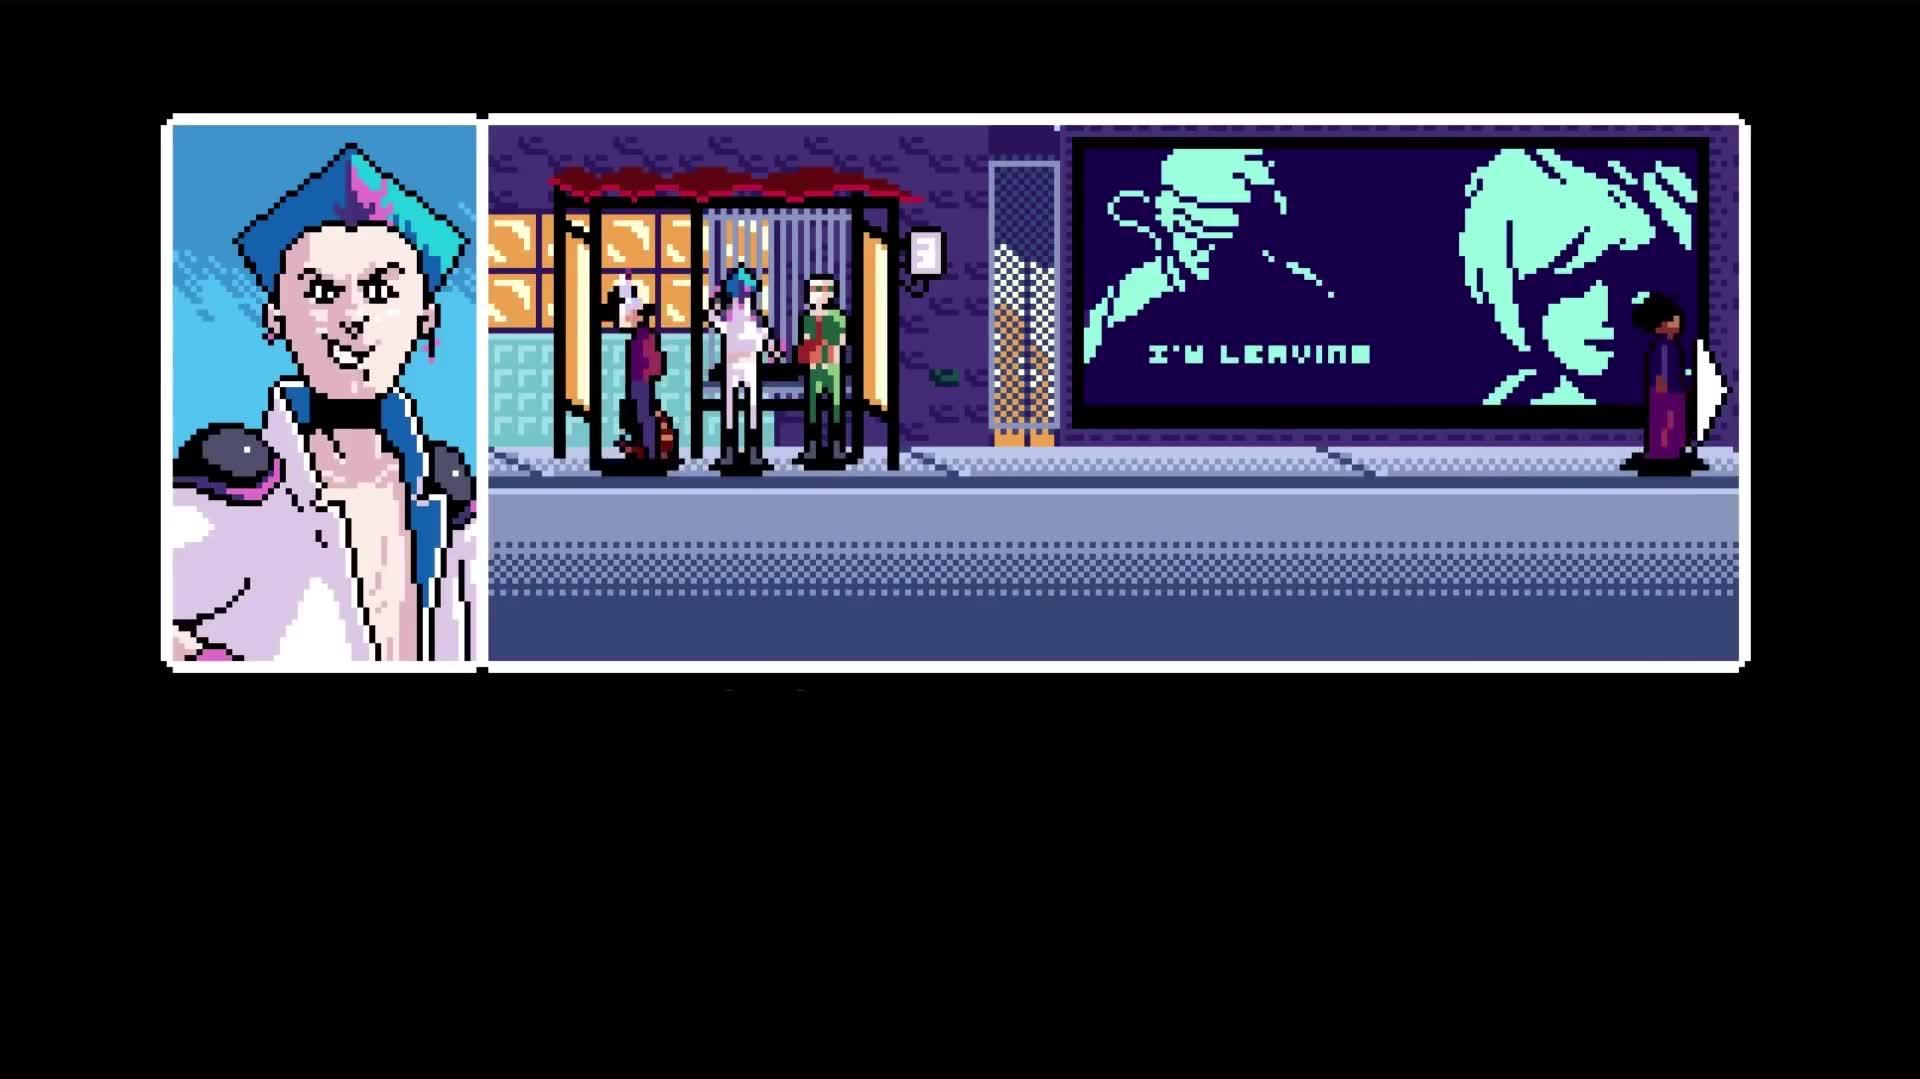 Read Only Memories Video Game